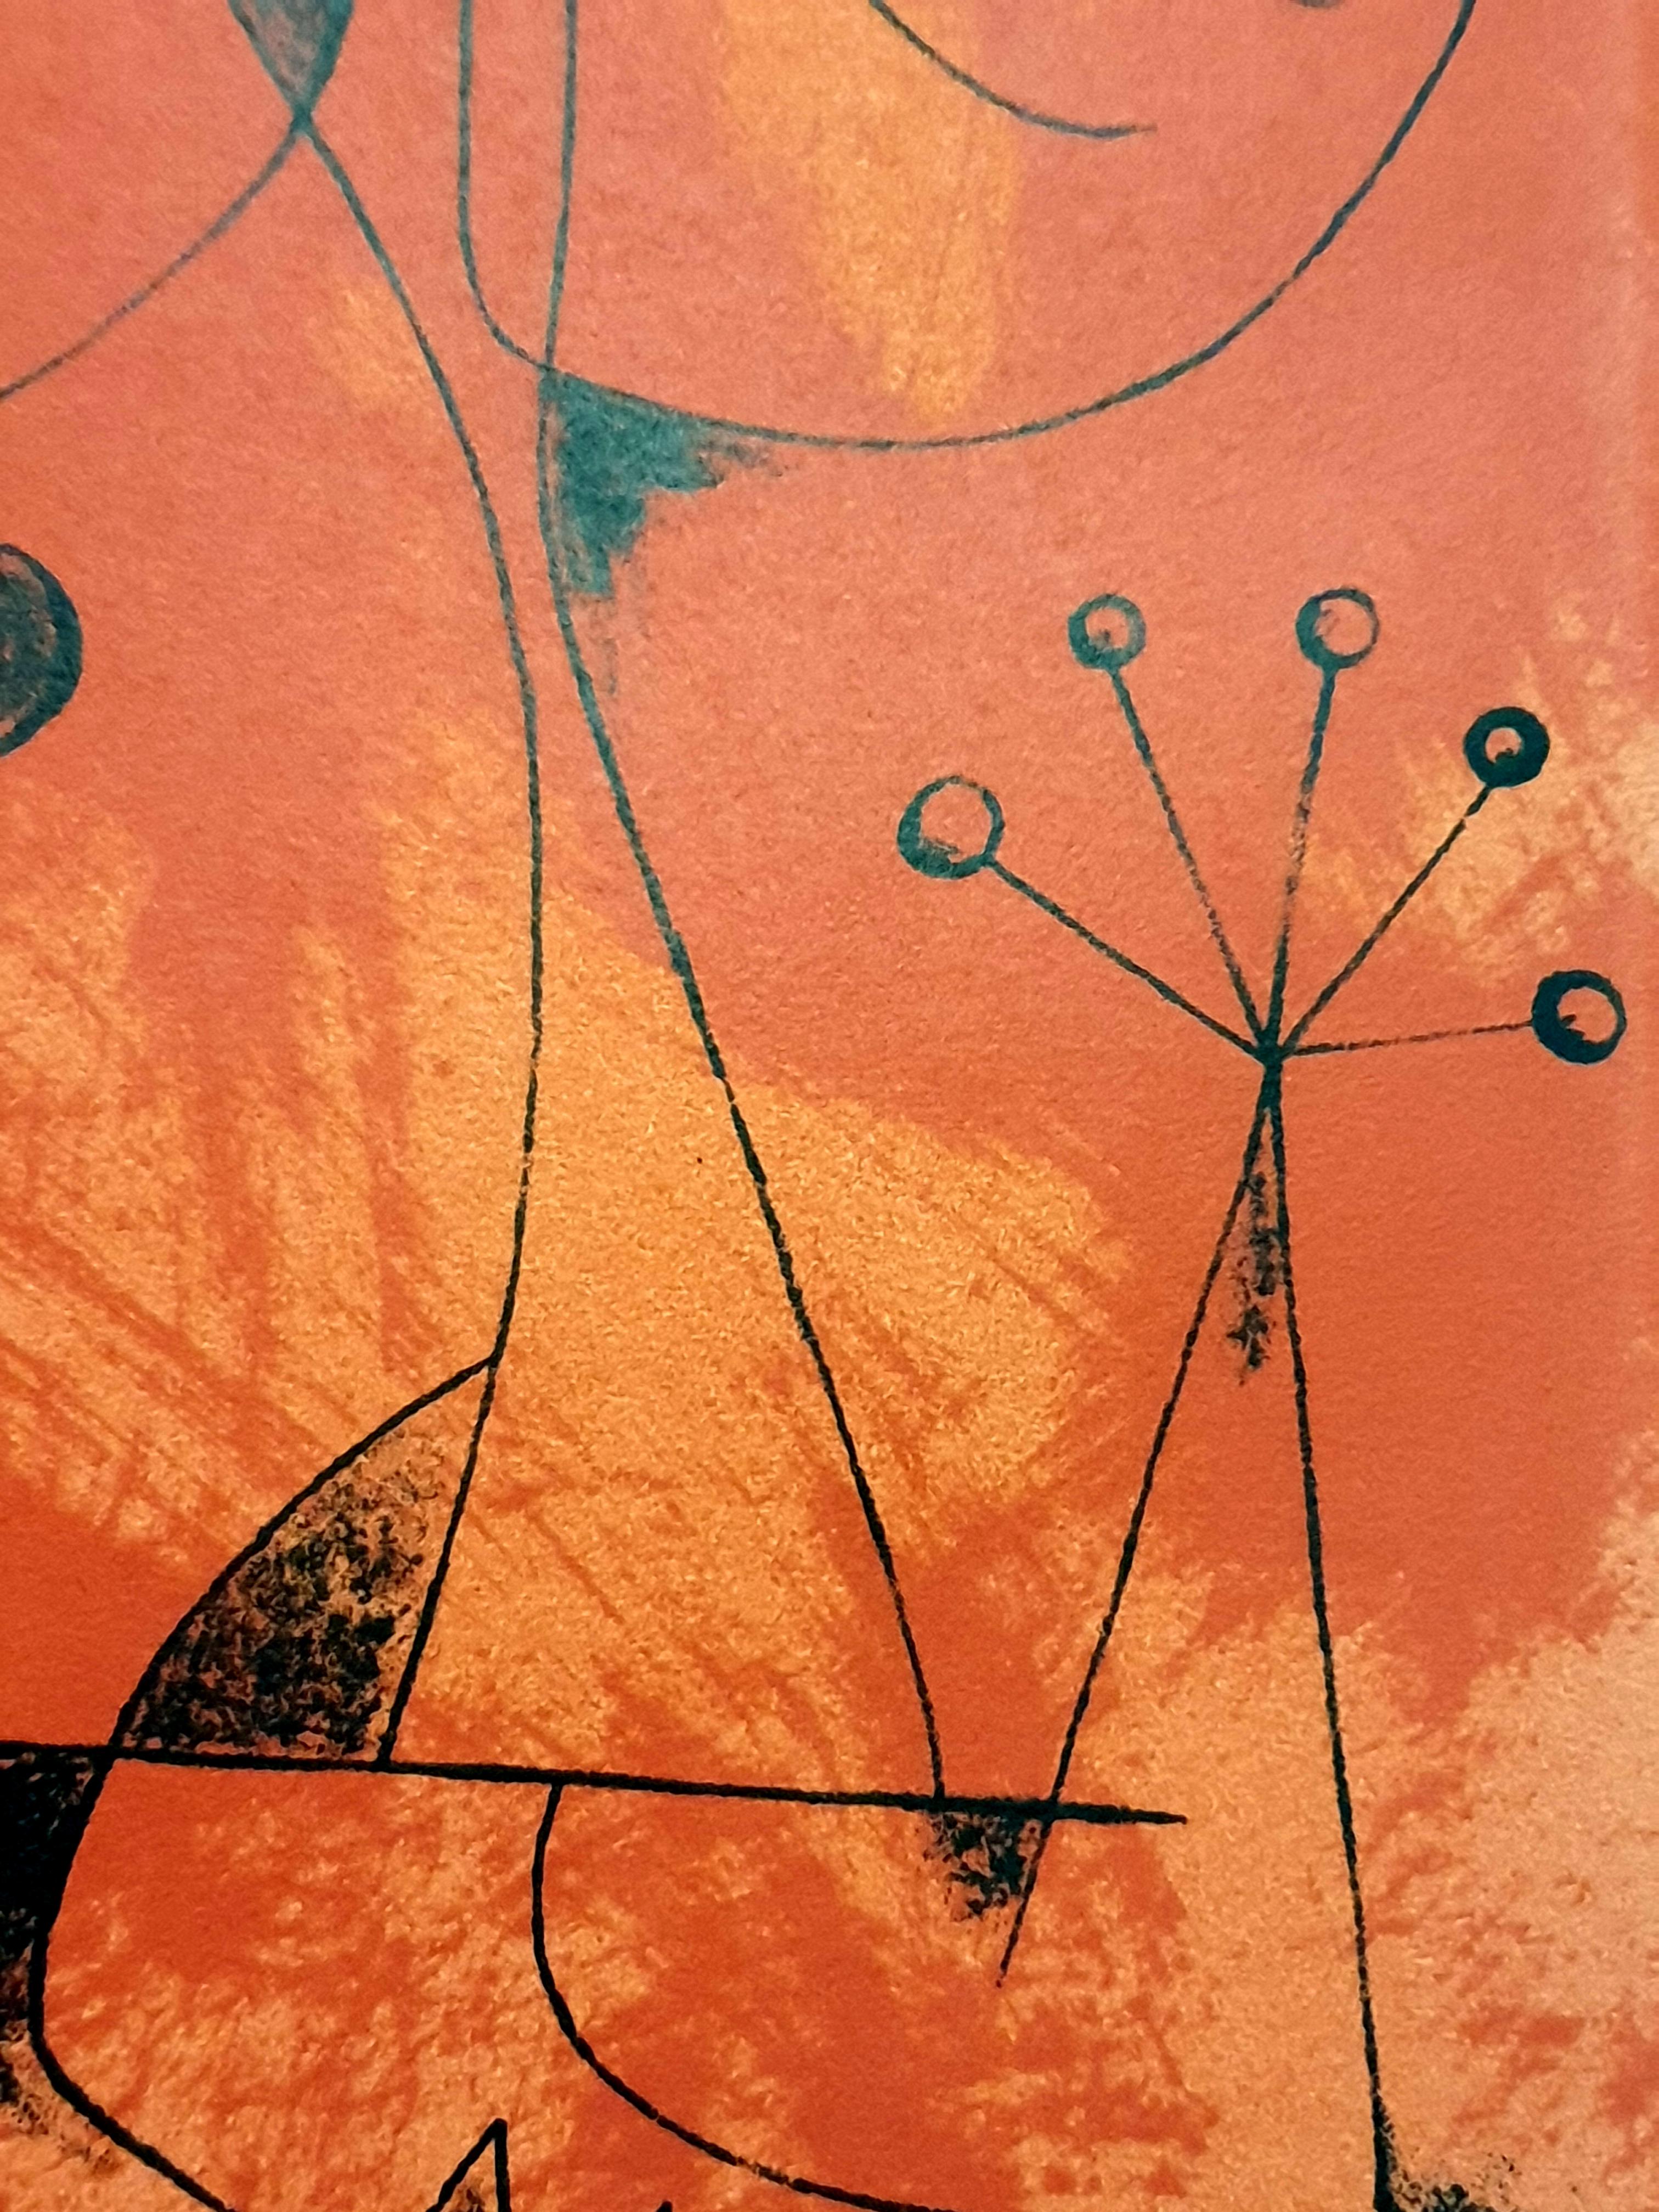 Plate VI, from Joan Miro by Jacques Prévert and Georges Ribemont-Dessaignes - Abstract Print by Joan Miró